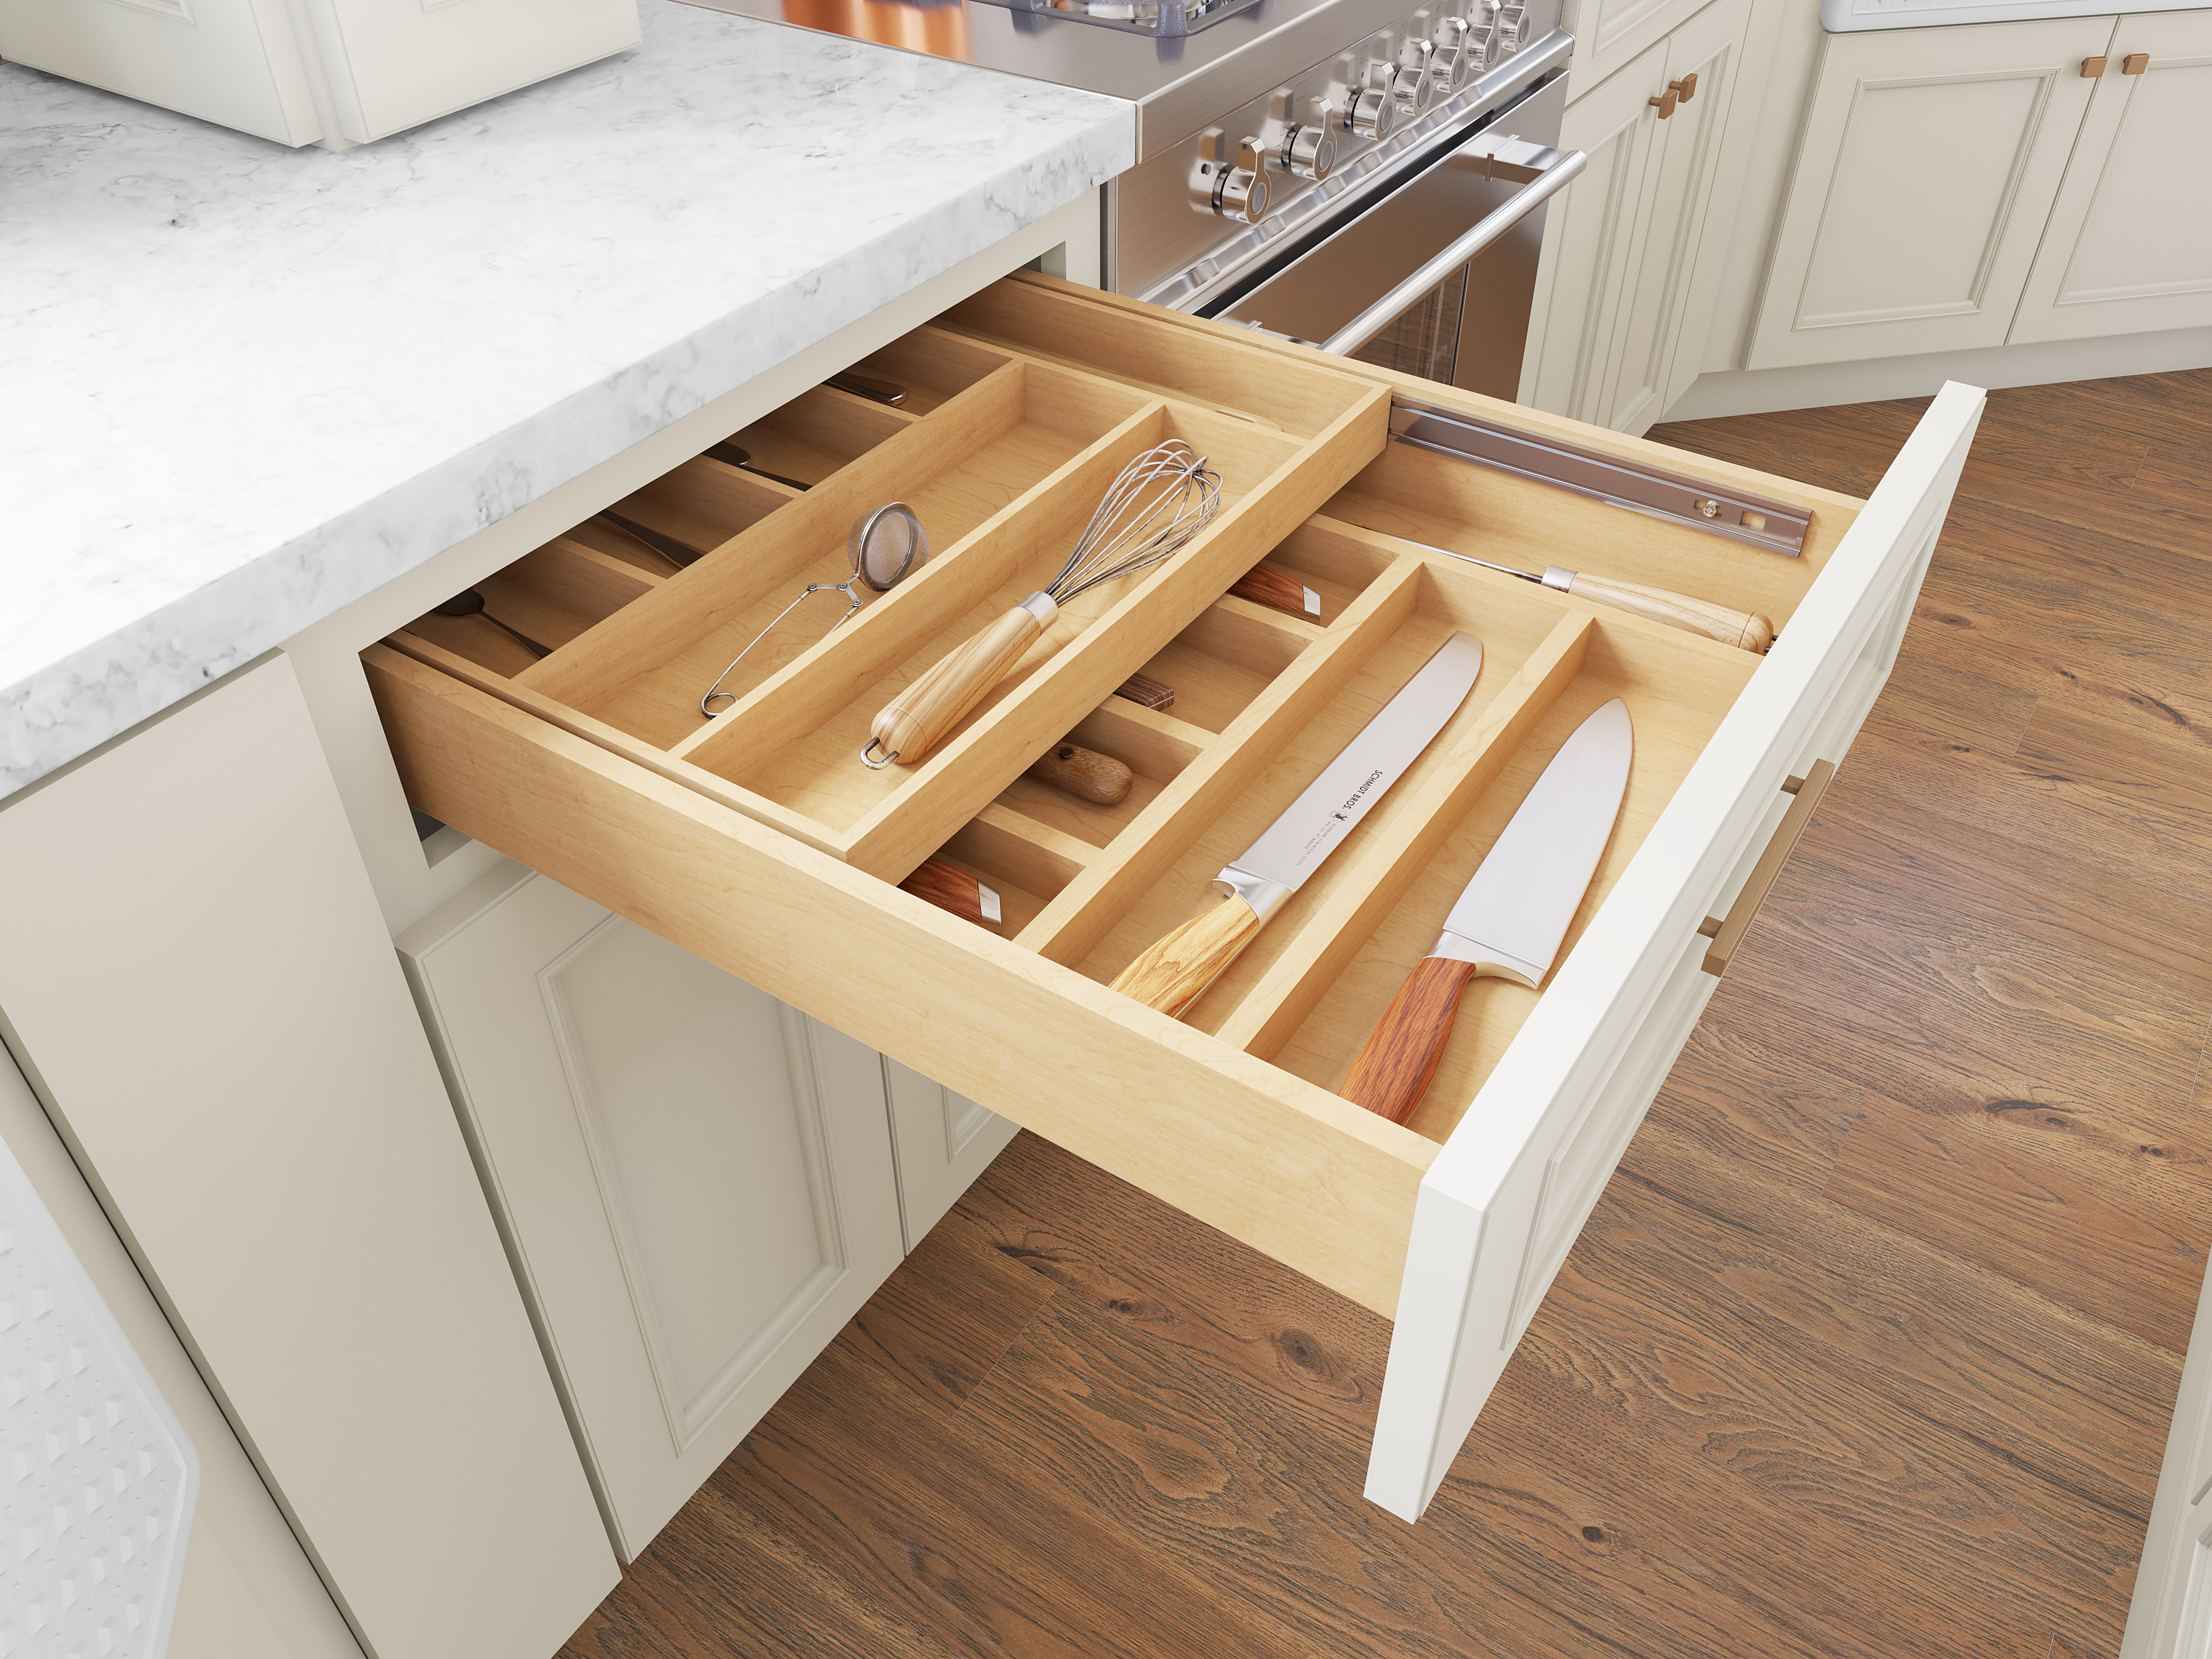 Two Tier Pull Out Organizer for Narrow Kitchen Cabinets